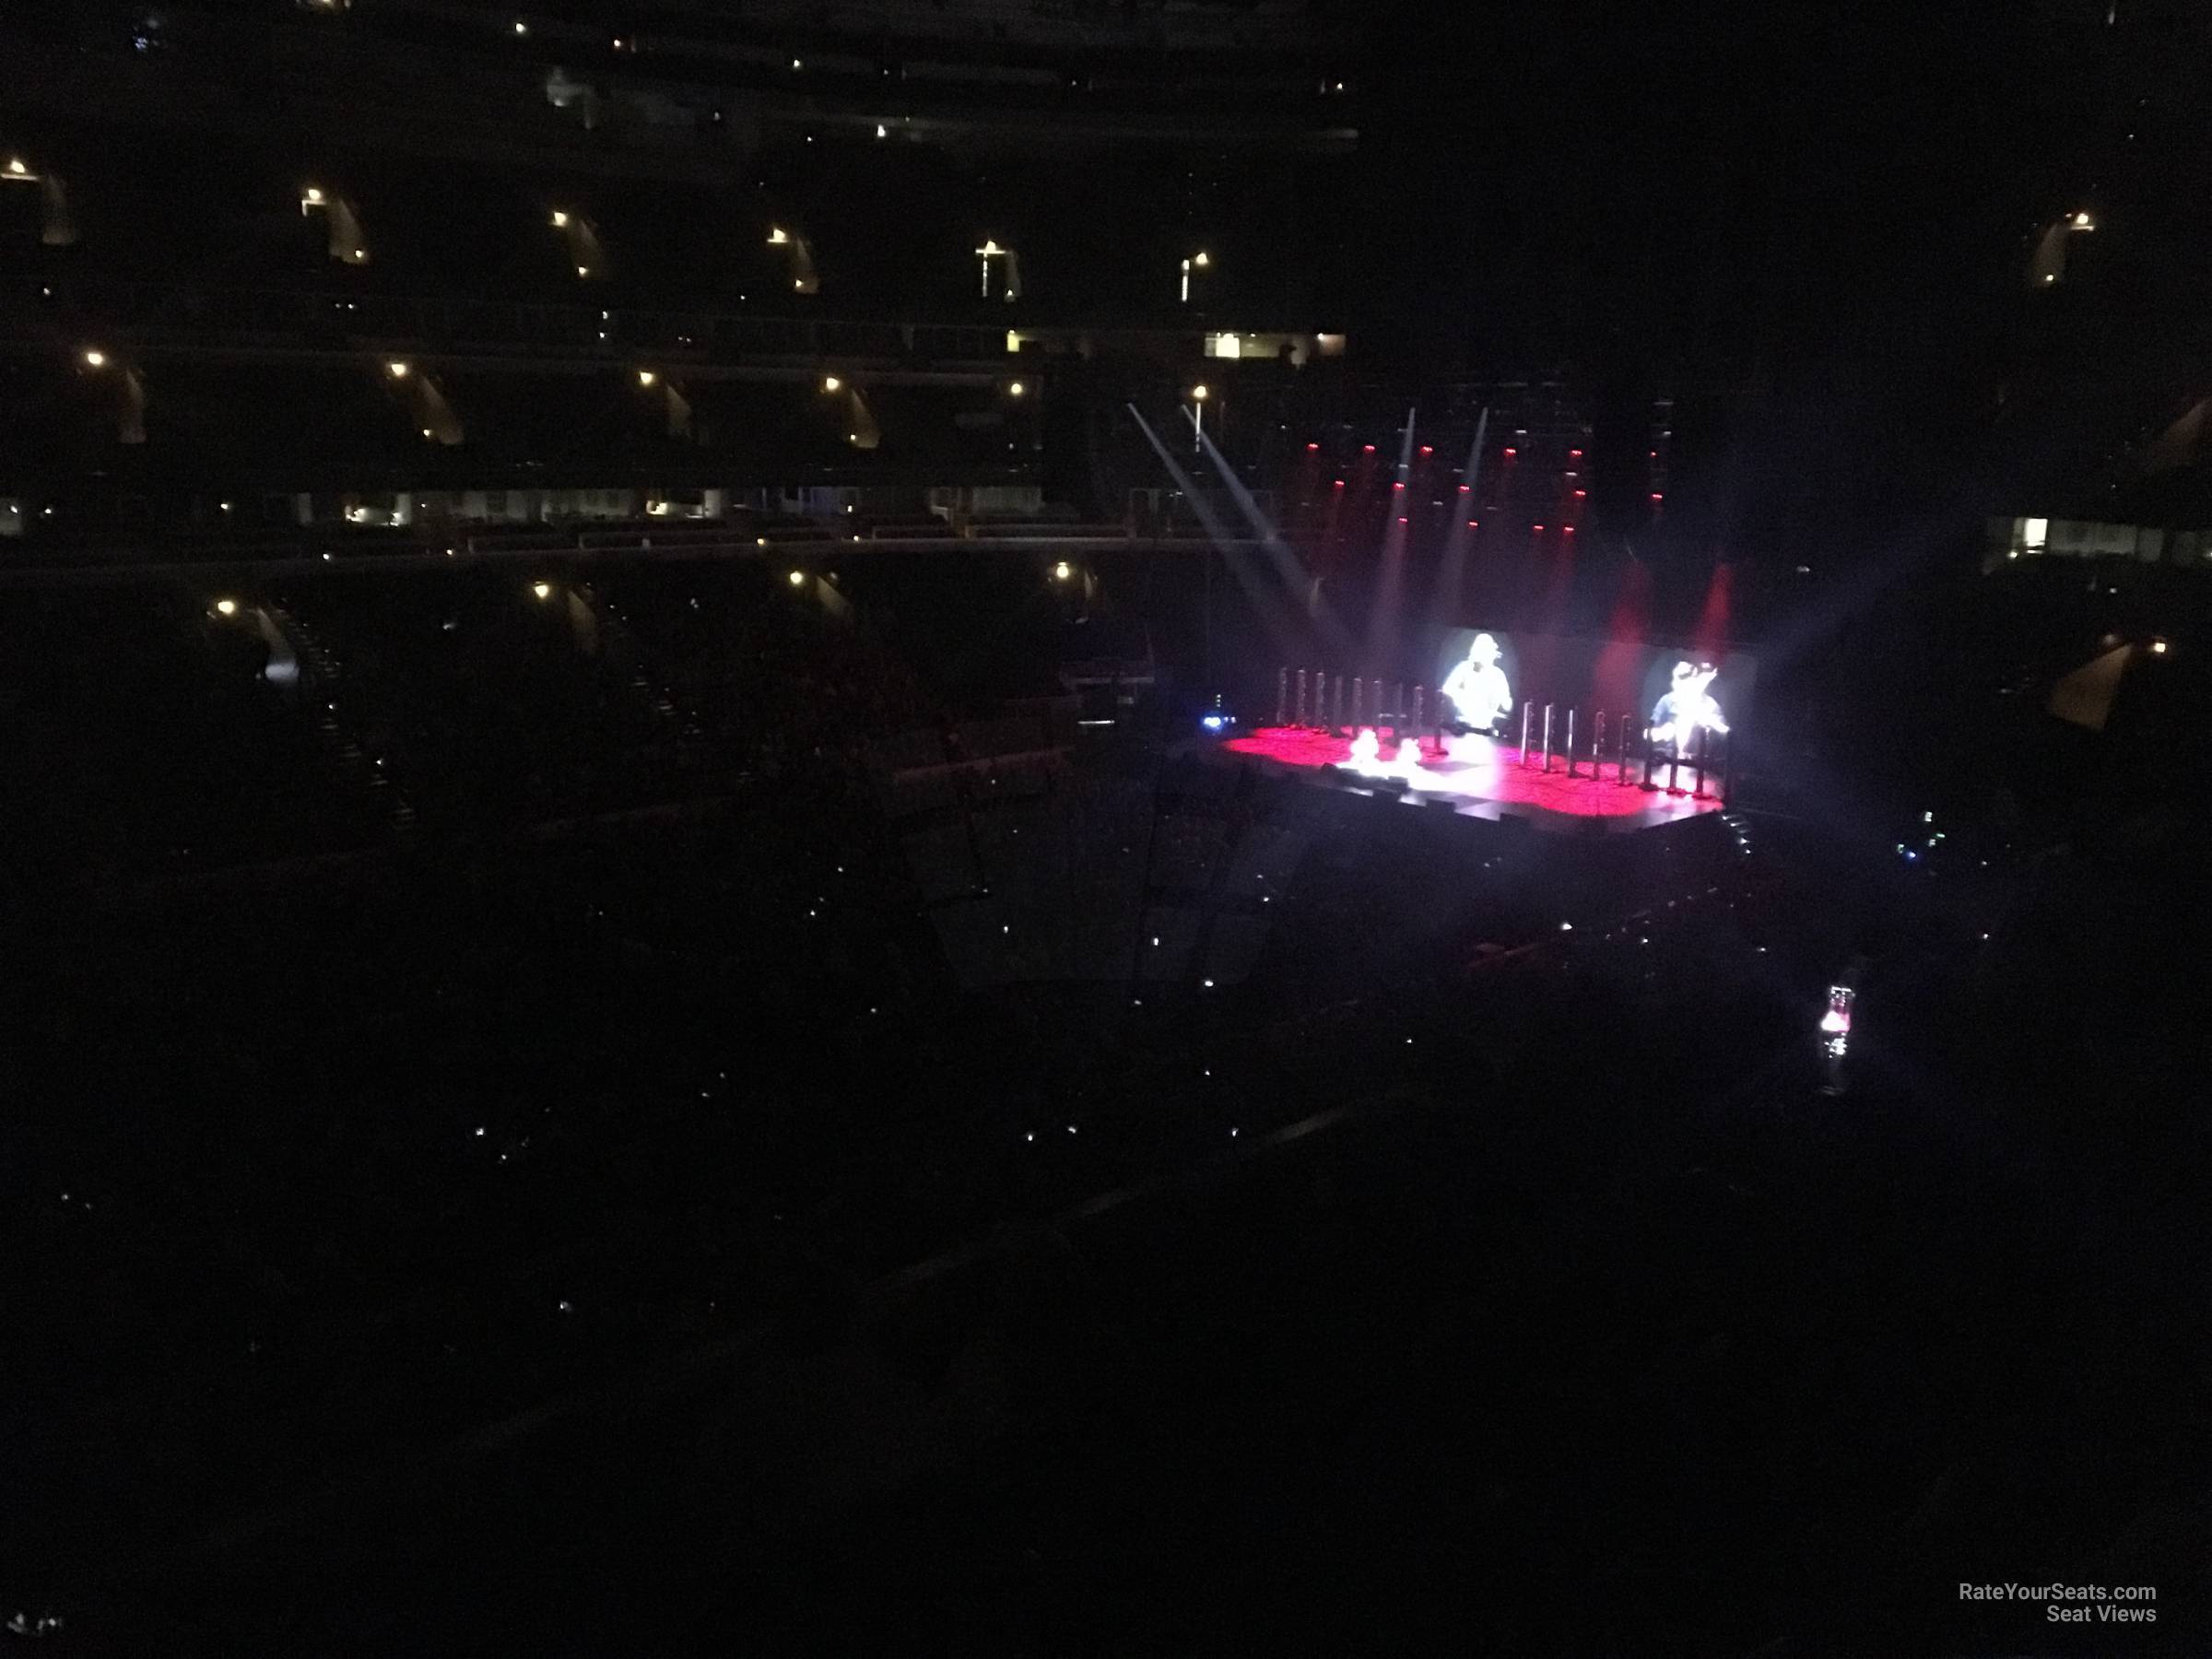 section 202, row 4 seat view  for concert - united center